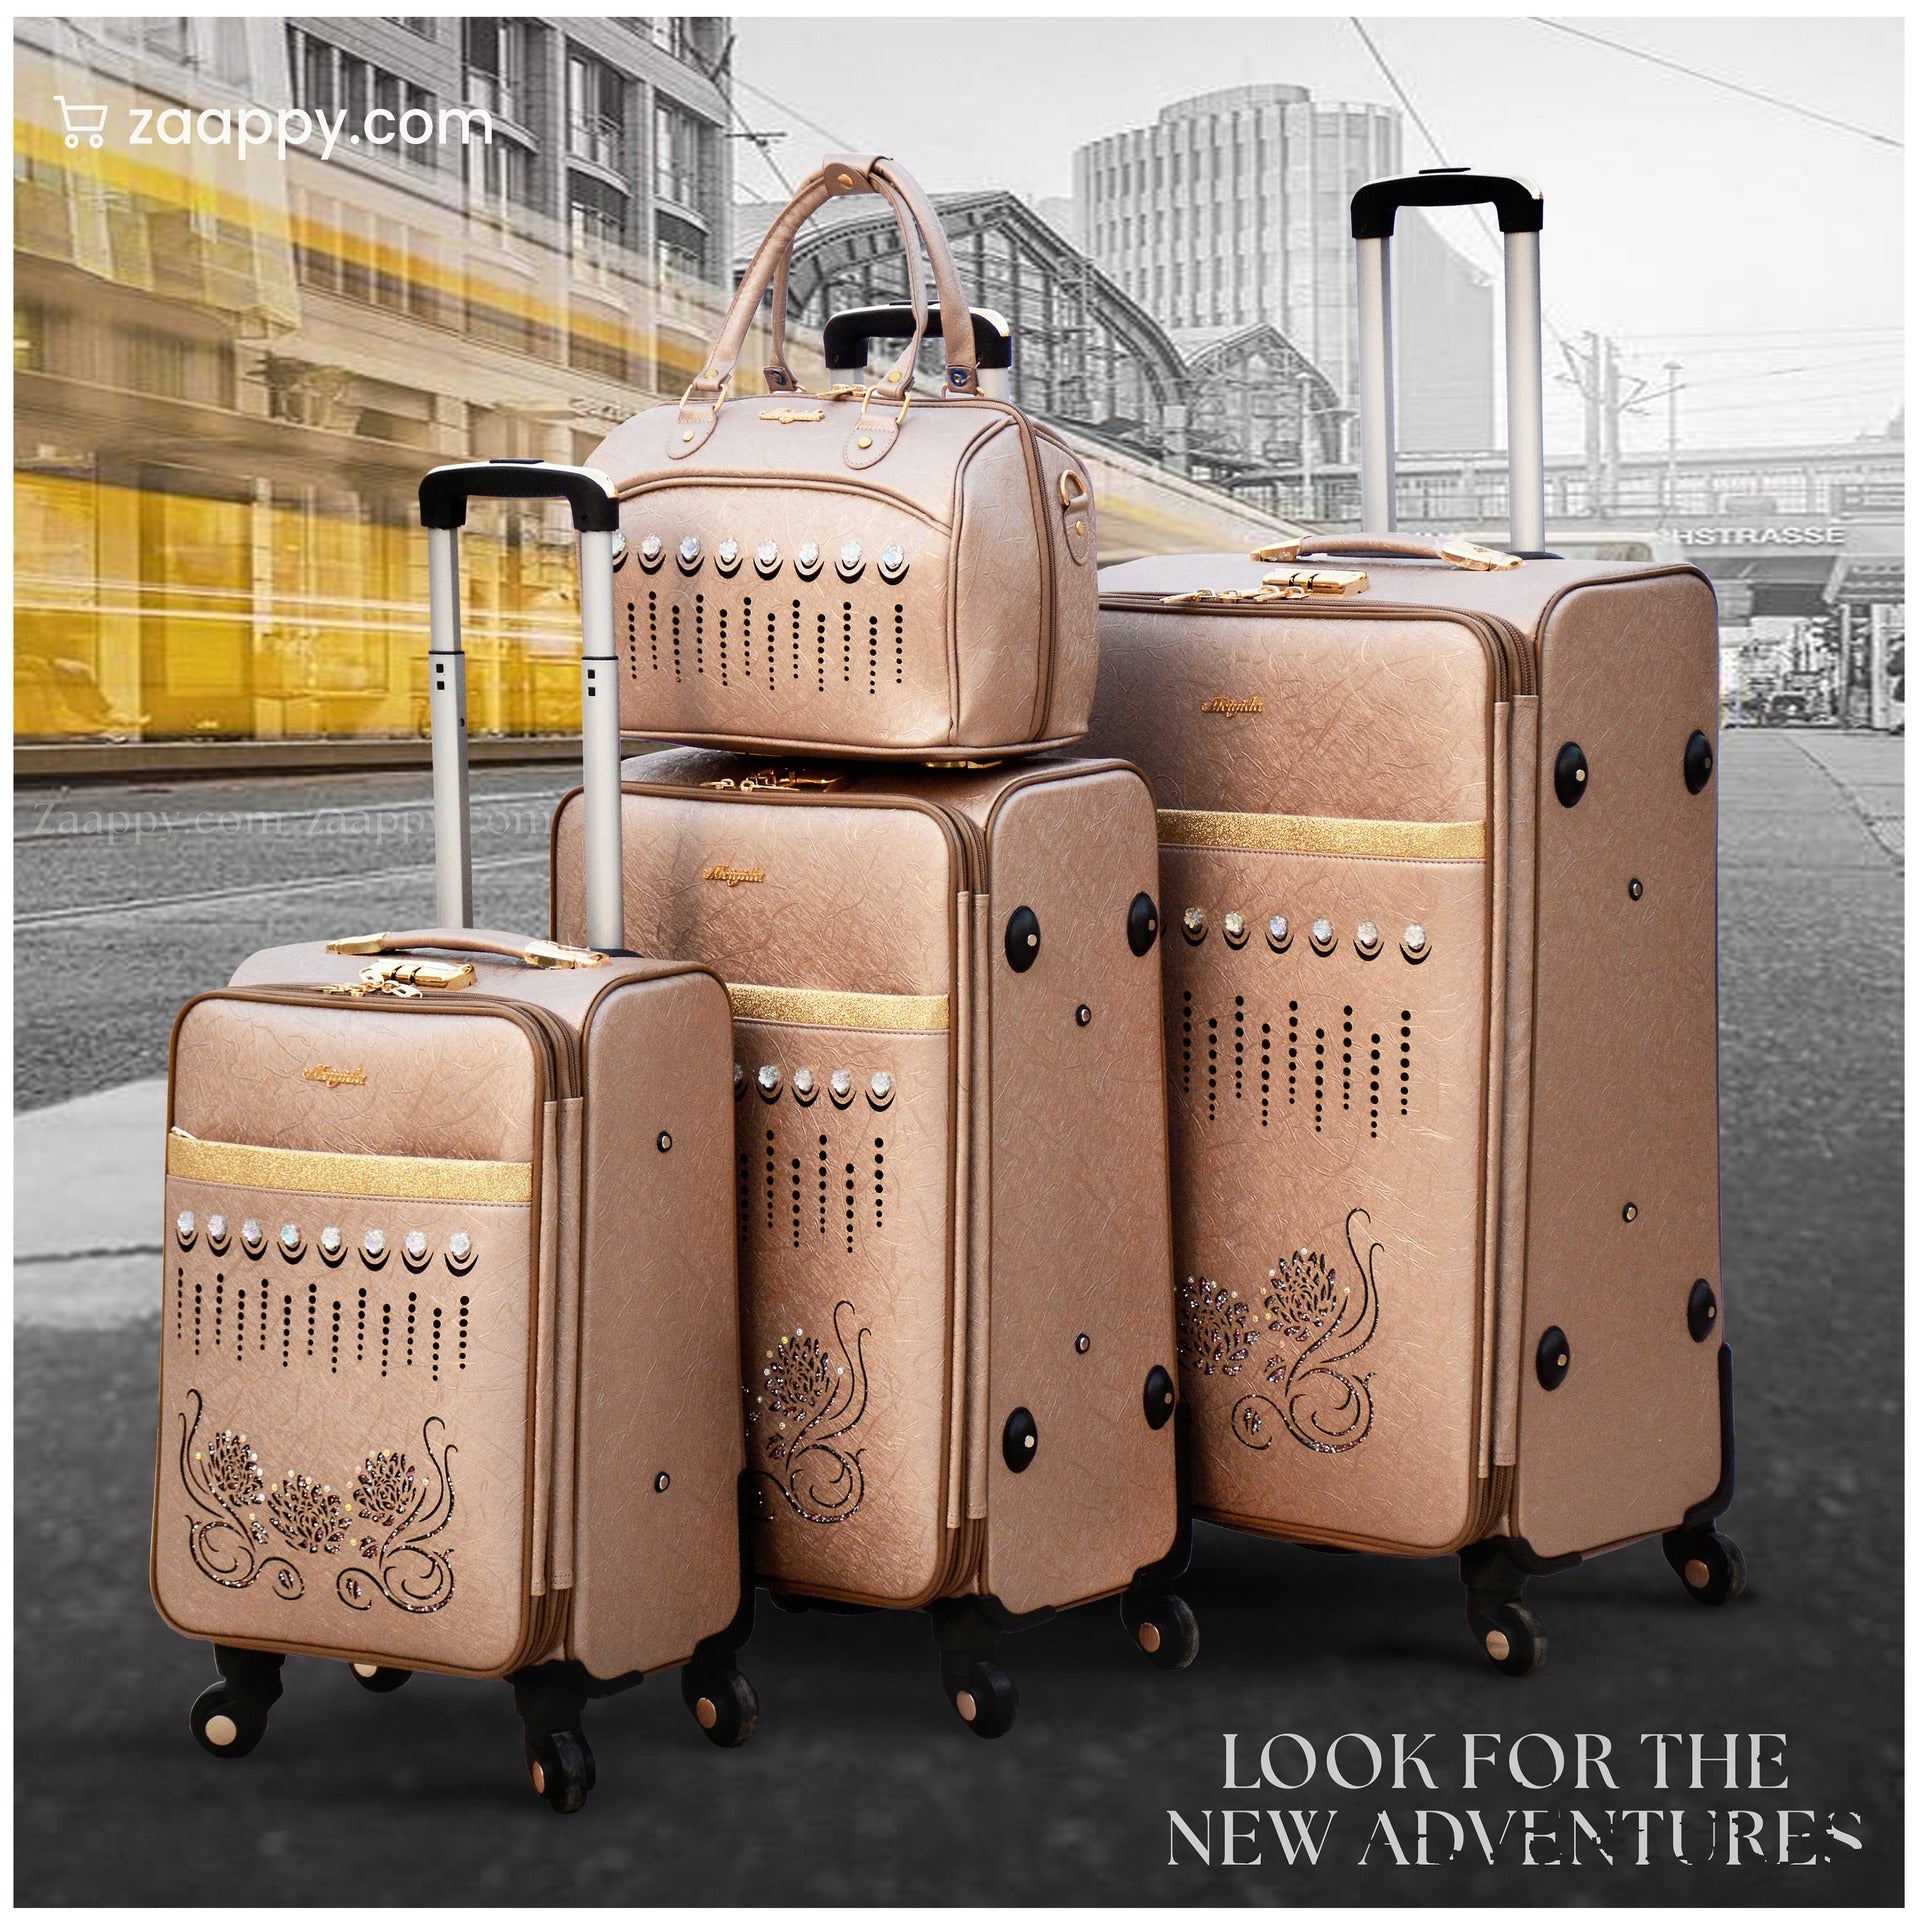 Asd PU Line Material Luggage | Soft Shell Trolley Bag| | 4 Pcs Set 7" 20" 24" 28 Inches | 2 Year Warranty | Asd PU Leather Line - Stone Rose Gold | |